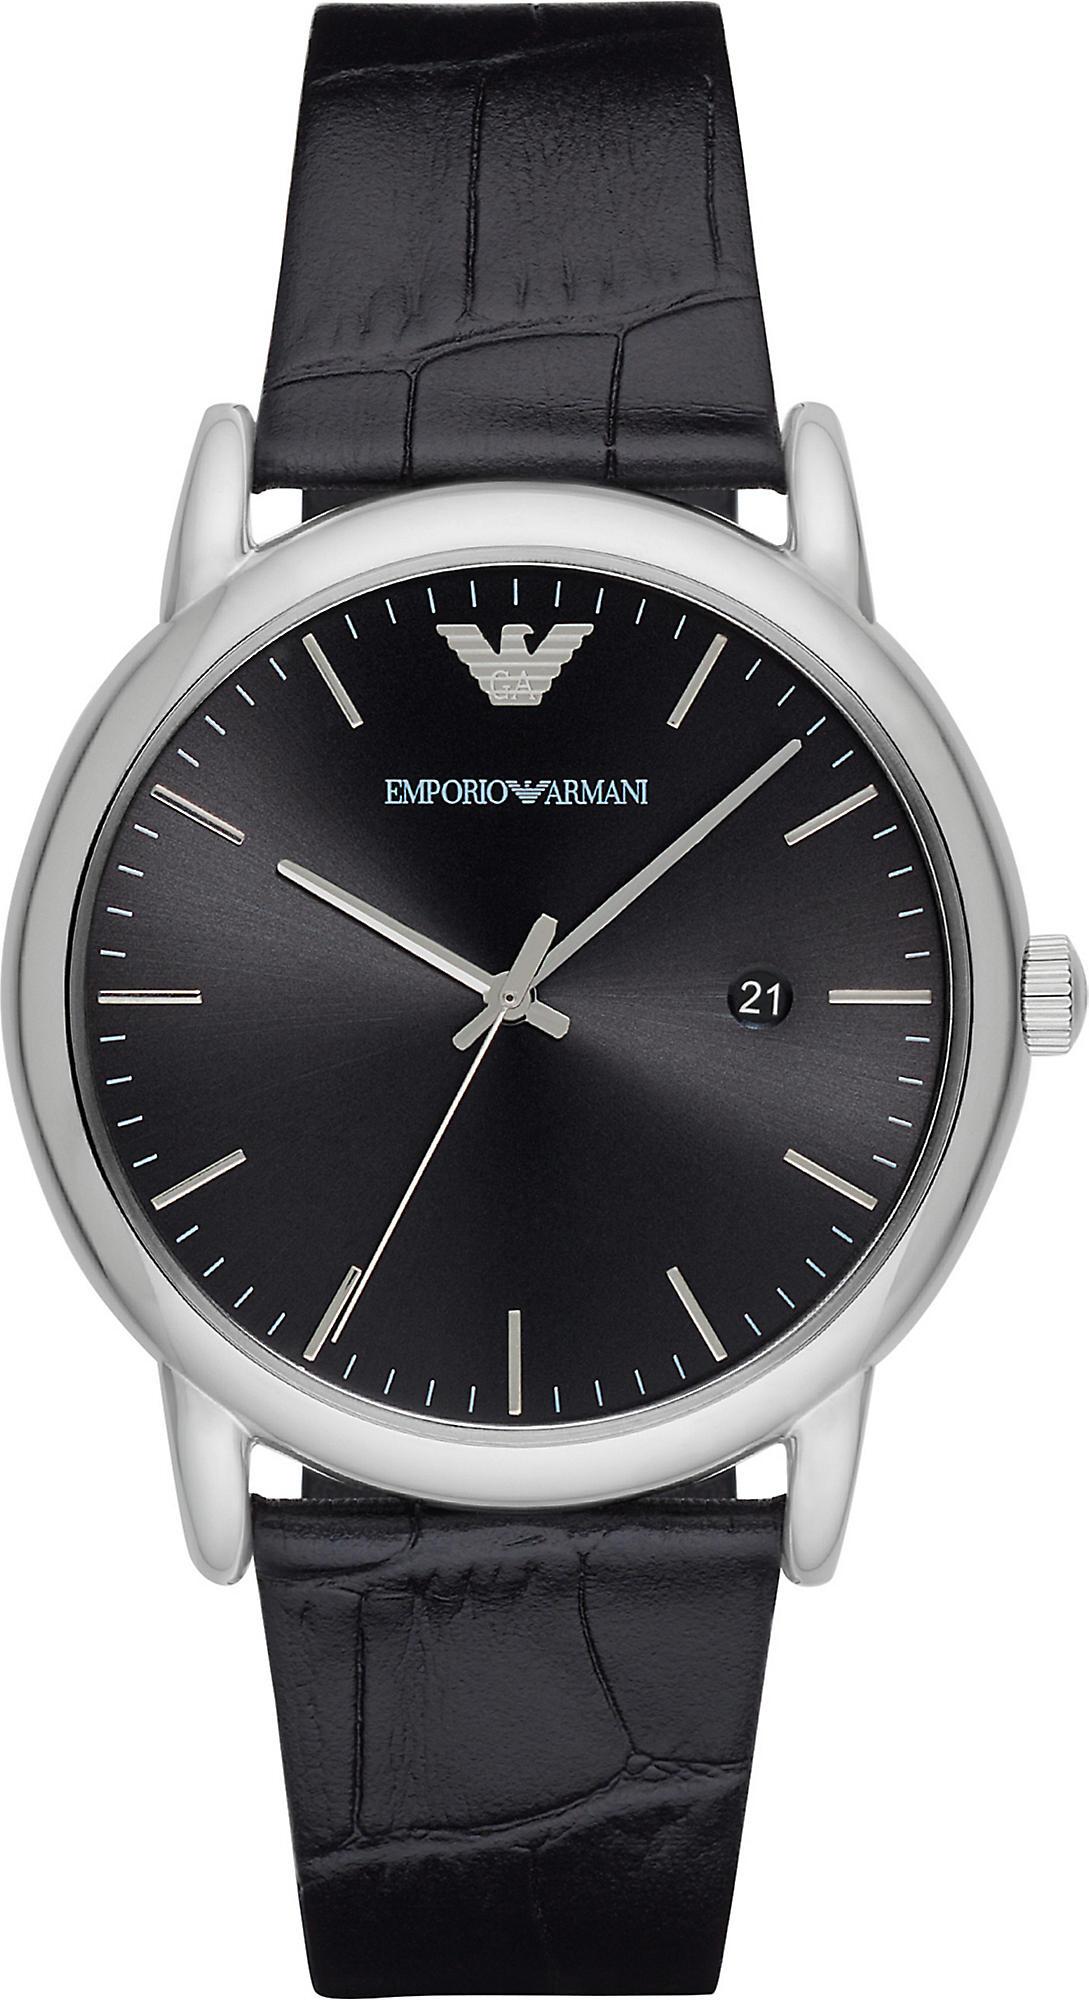 Emporio Armani Ar2500 Stainless Steel And Leather Watch in Black for Emporio Armani Stainless Steel Watch